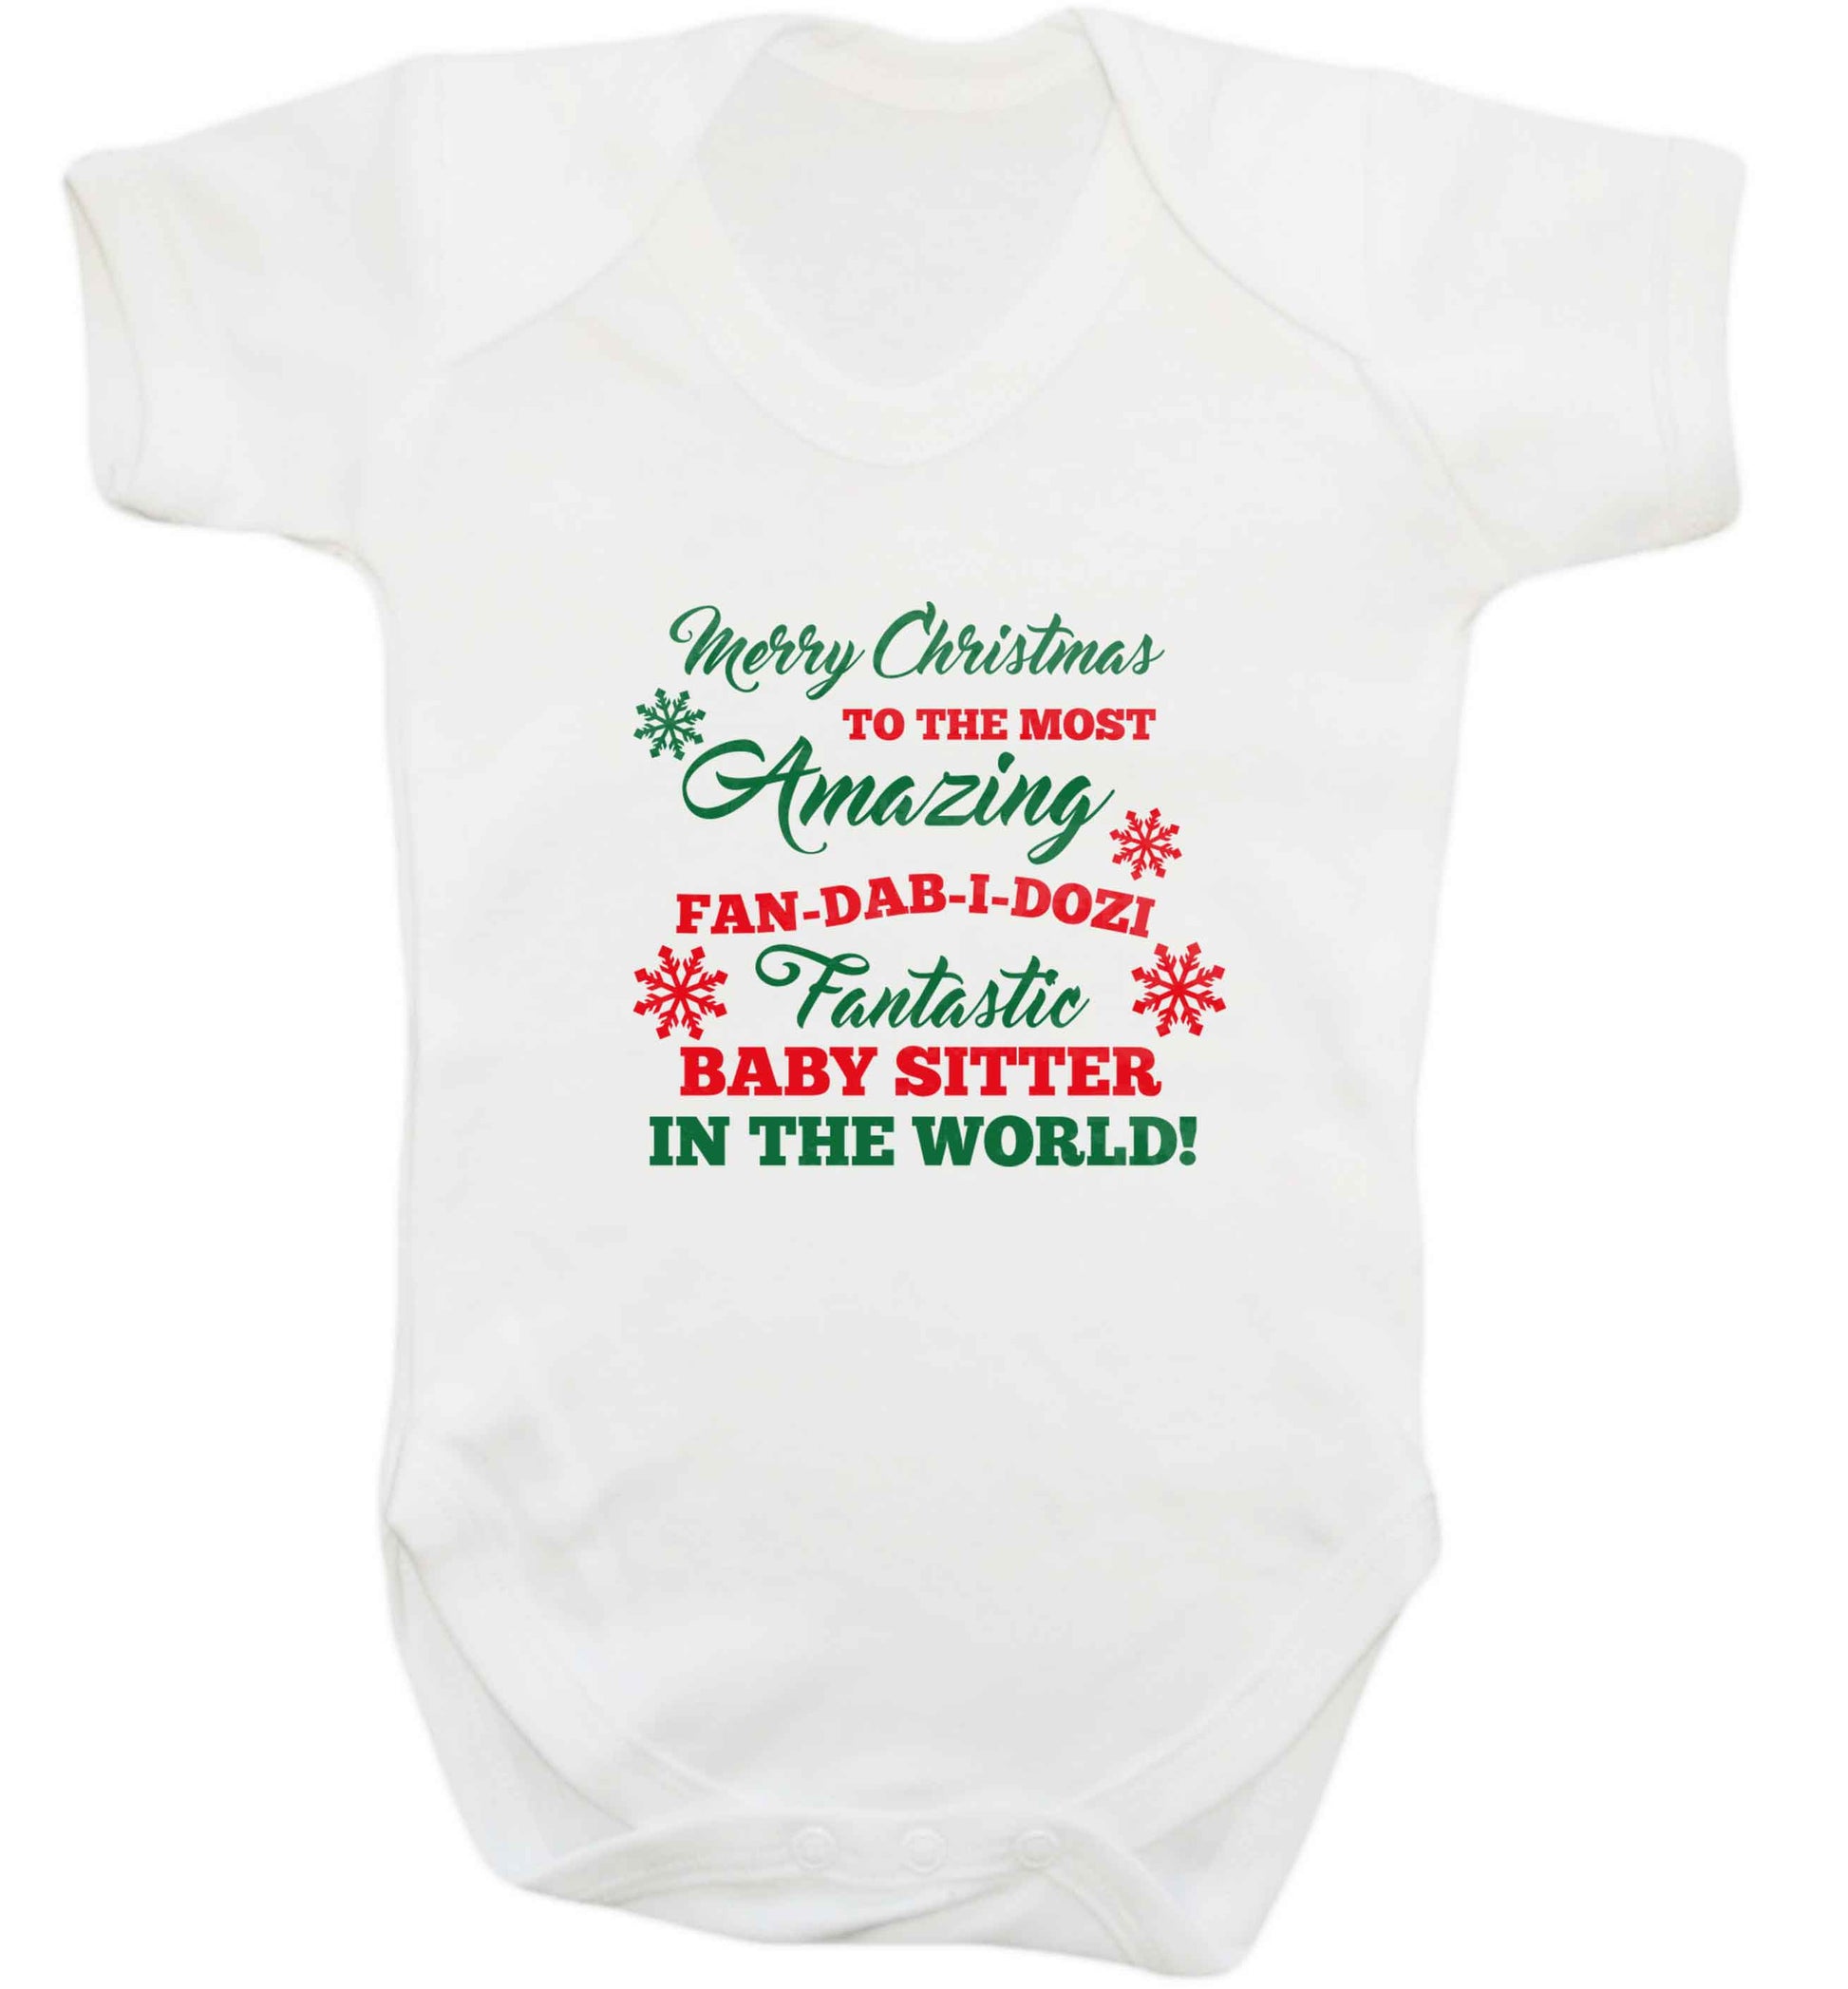 Merry Christmas to the most amazing fan-dab-i-dozi fantasic baby sitter in the world baby vest white 18-24 months